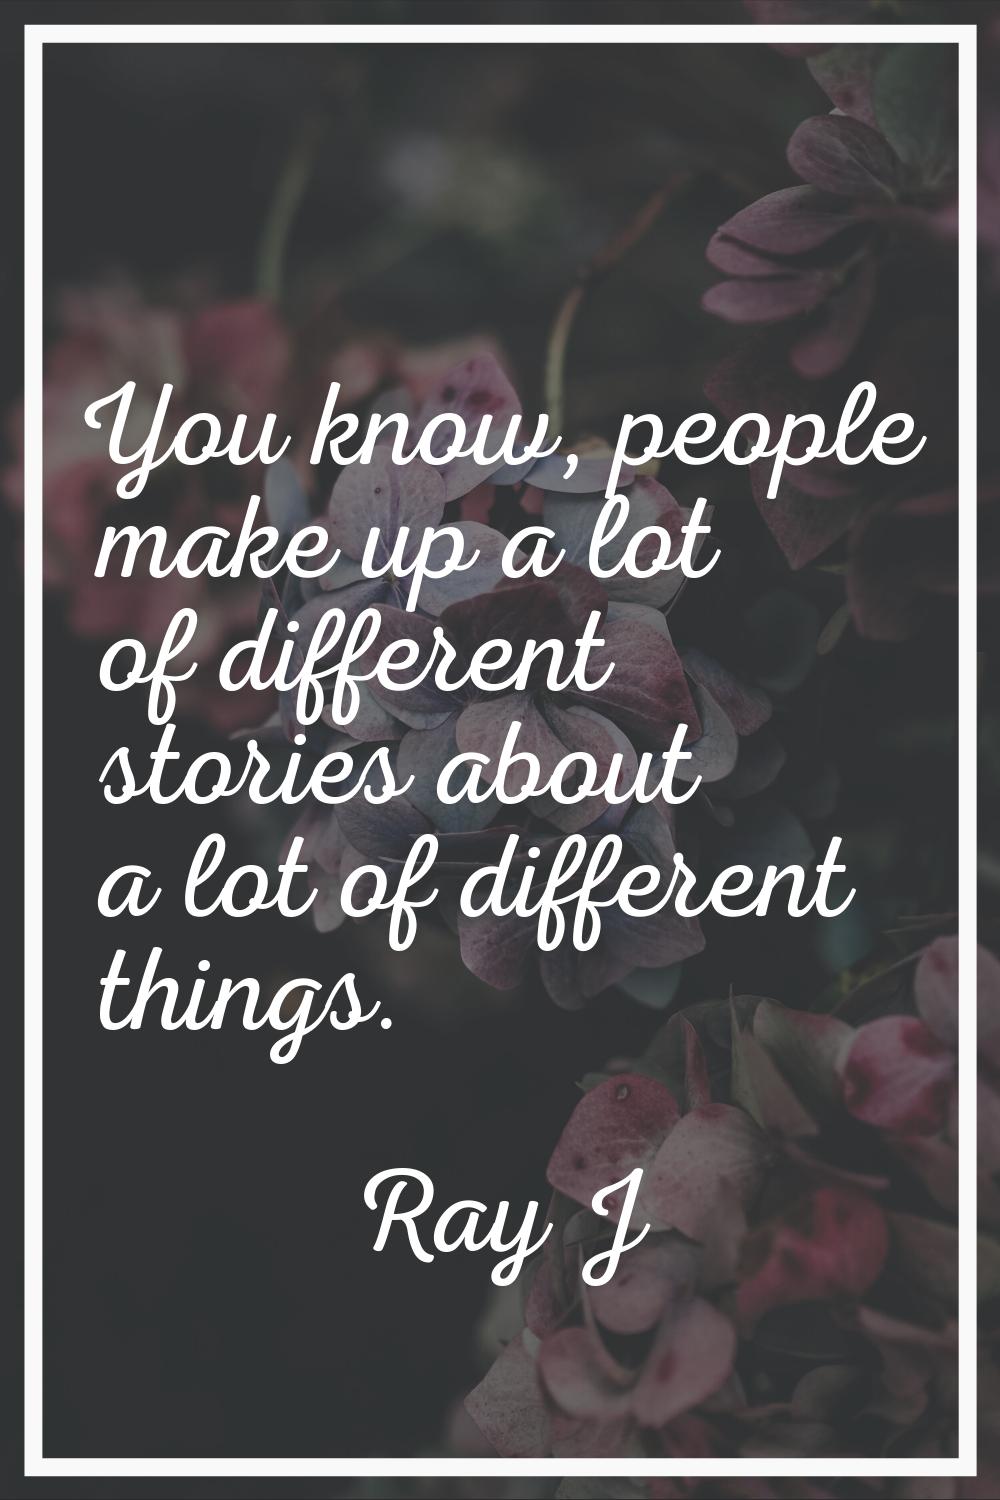 You know, people make up a lot of different stories about a lot of different things.